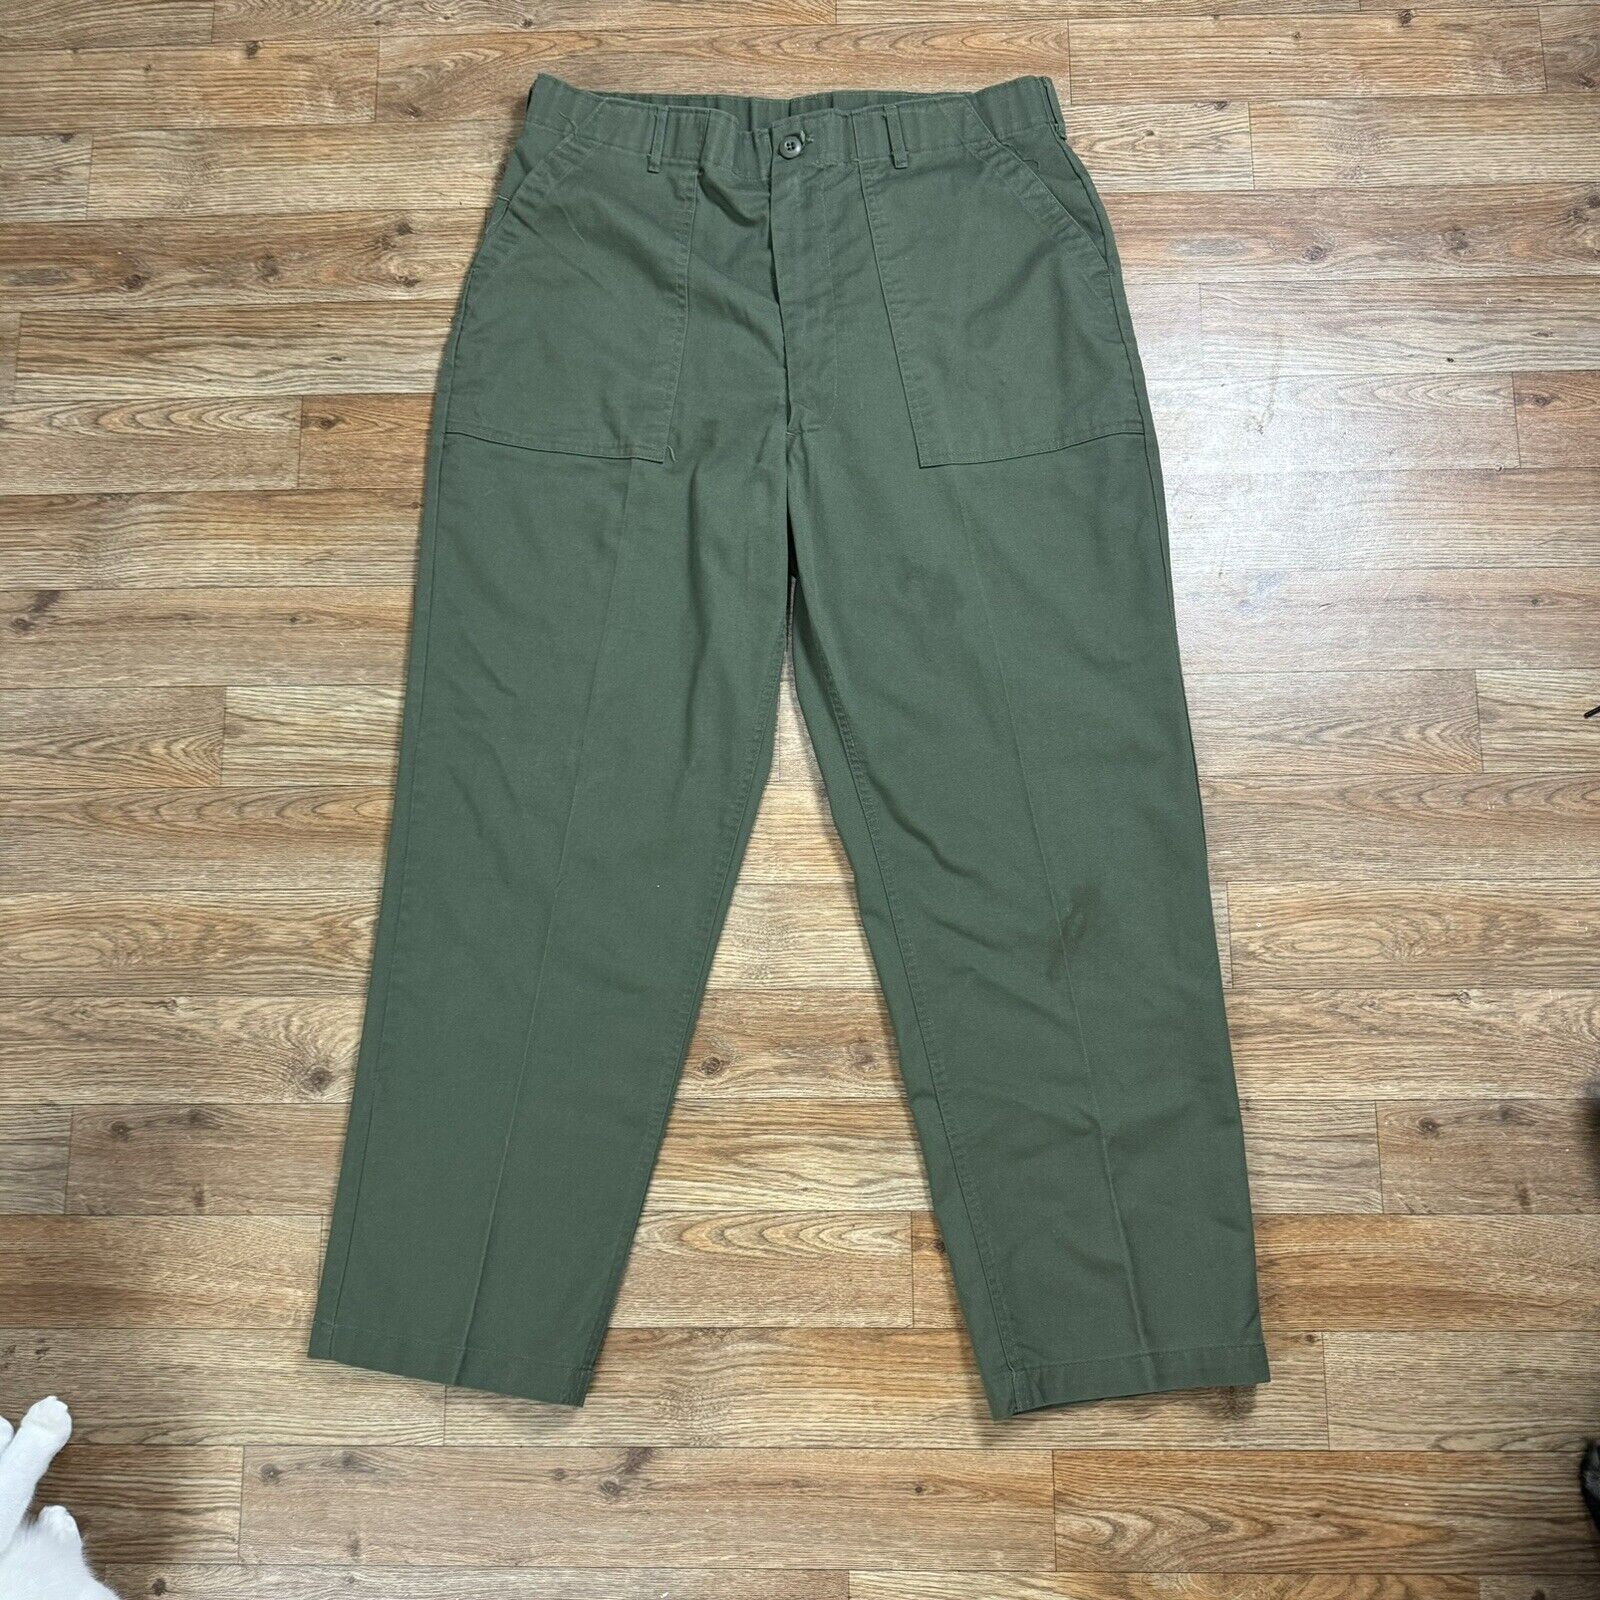 Vintage Military Trousers 35x31 OG 507 Army Trousers 70s Vietnam War Utility